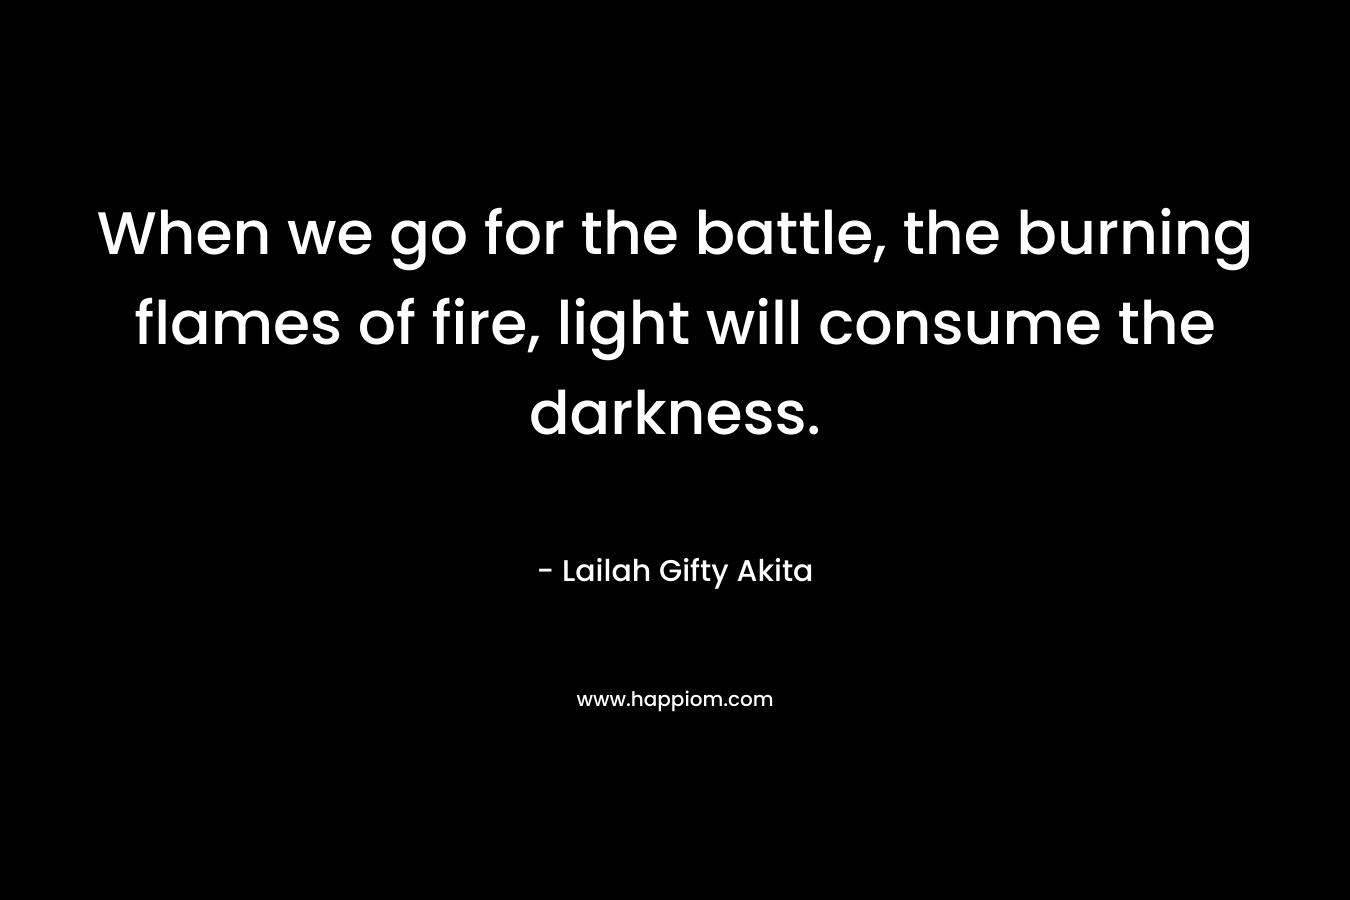 When we go for the battle, the burning flames of fire, light will consume the darkness.